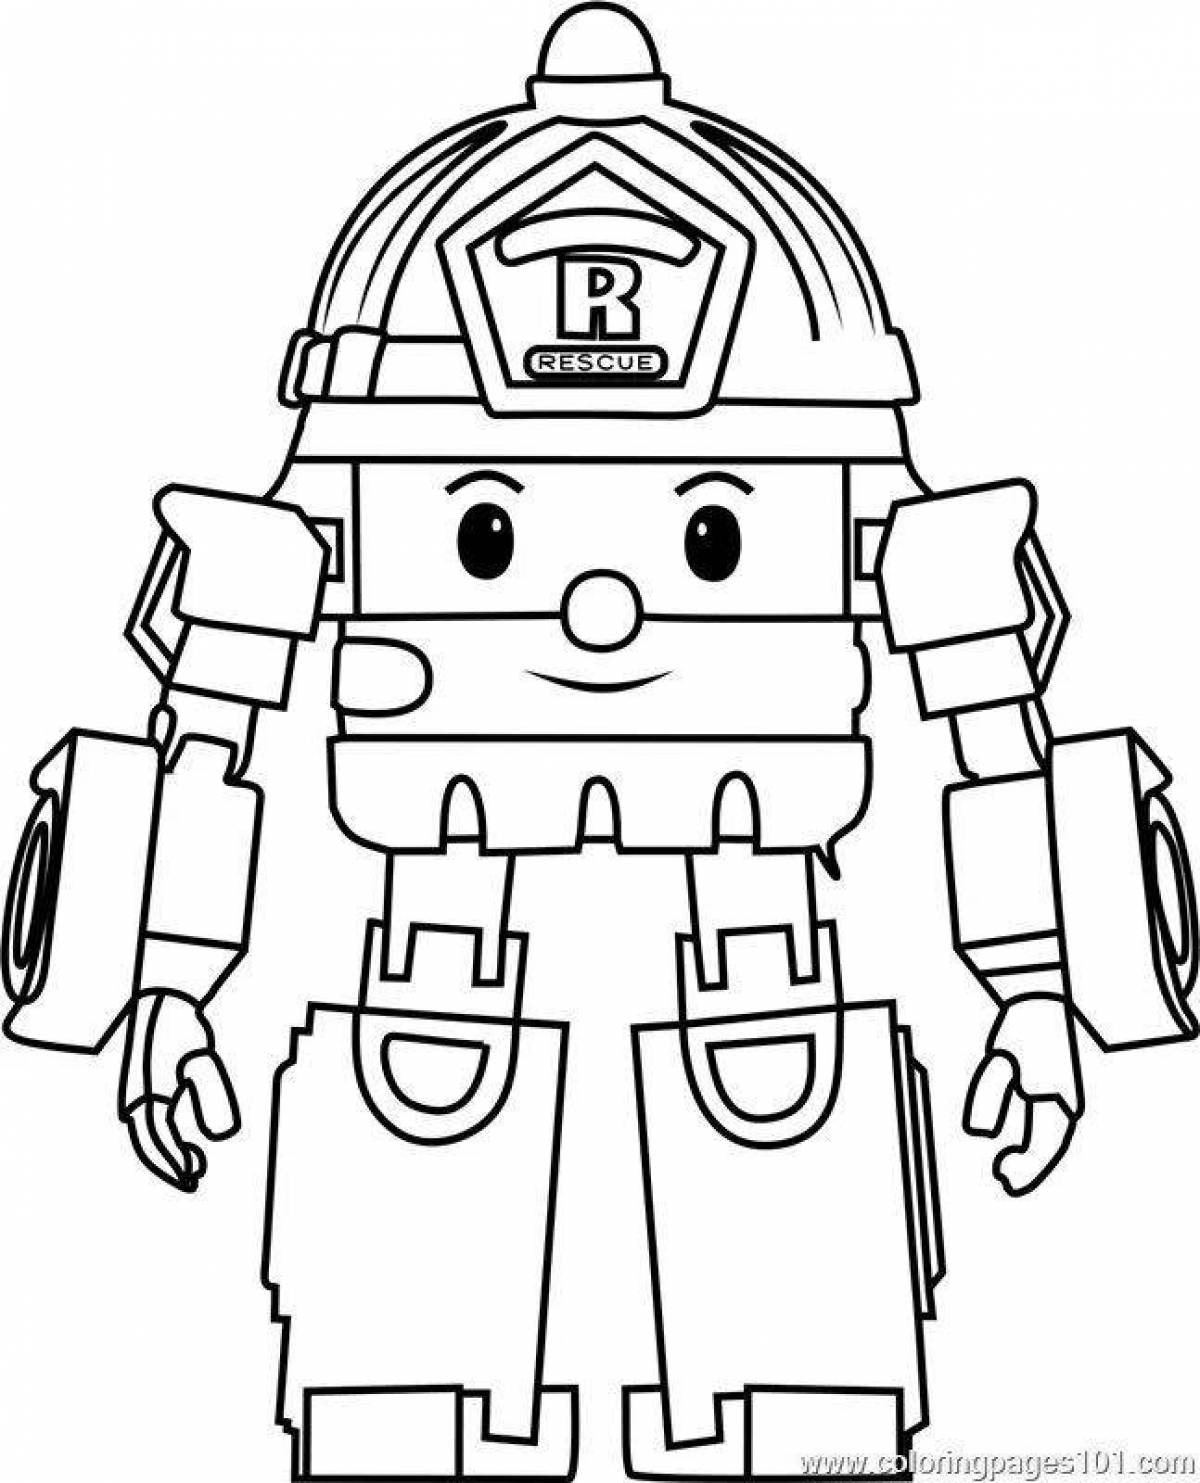 Glamorous police robot coloring page